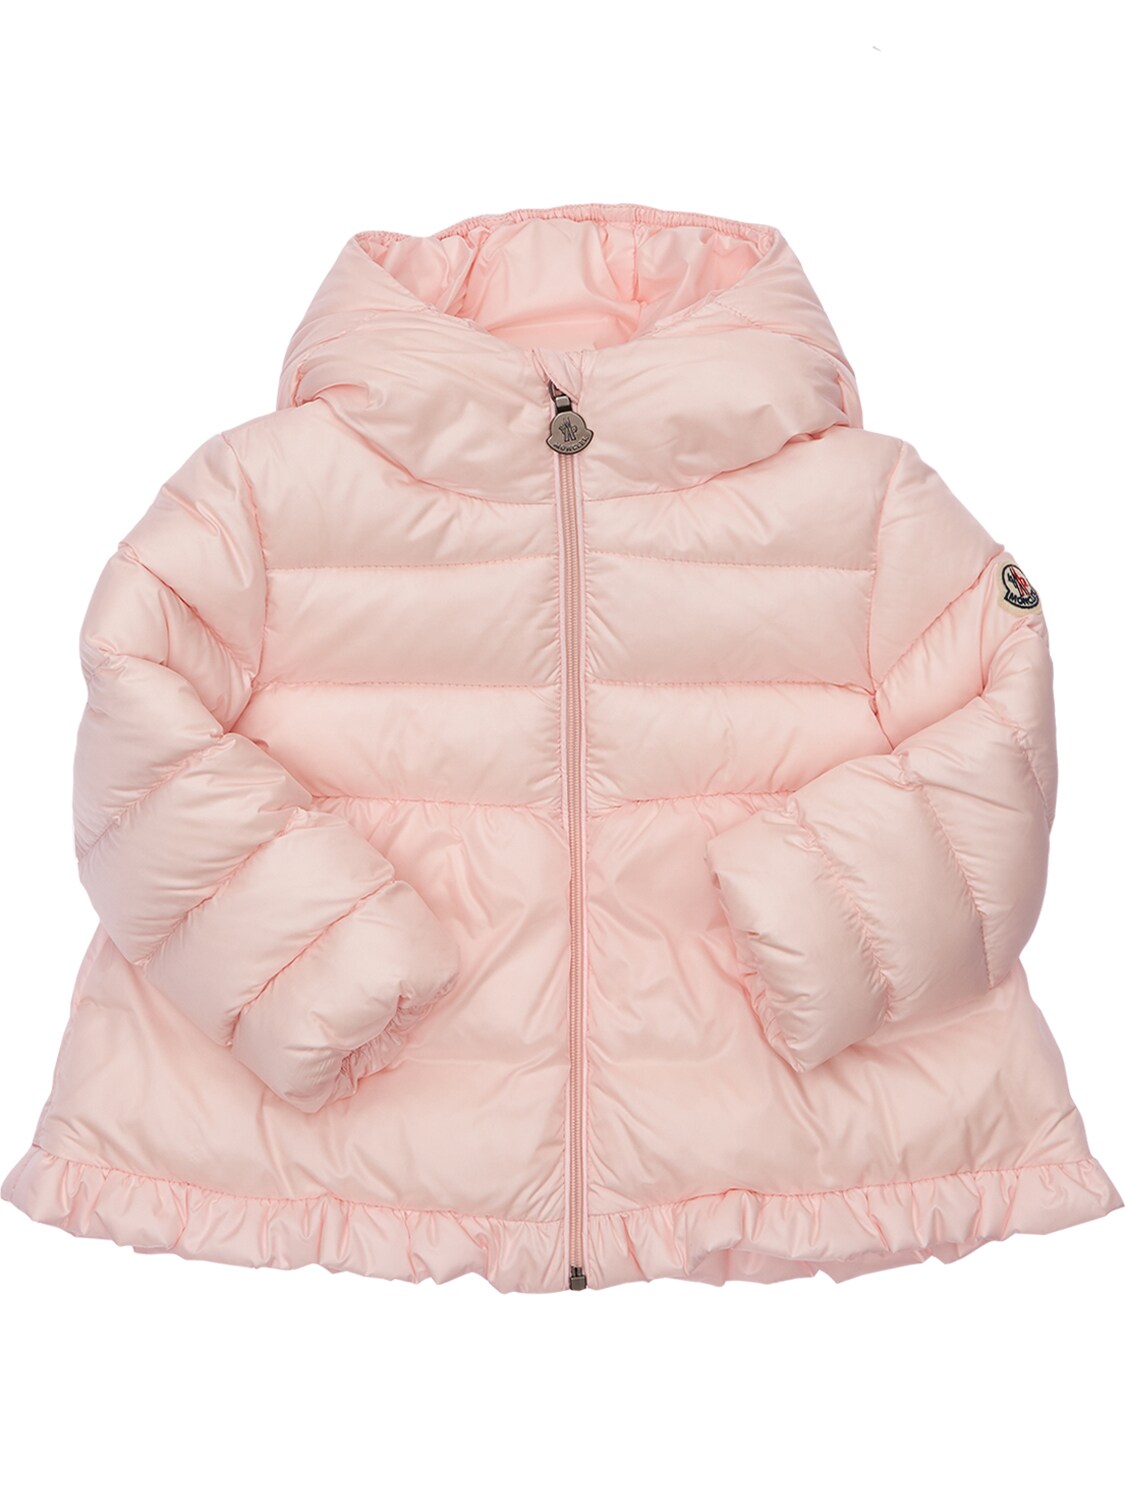 MONCLER ODILE HOODED NYLON DOWN JACKET,74IFGT002-NTAZ0